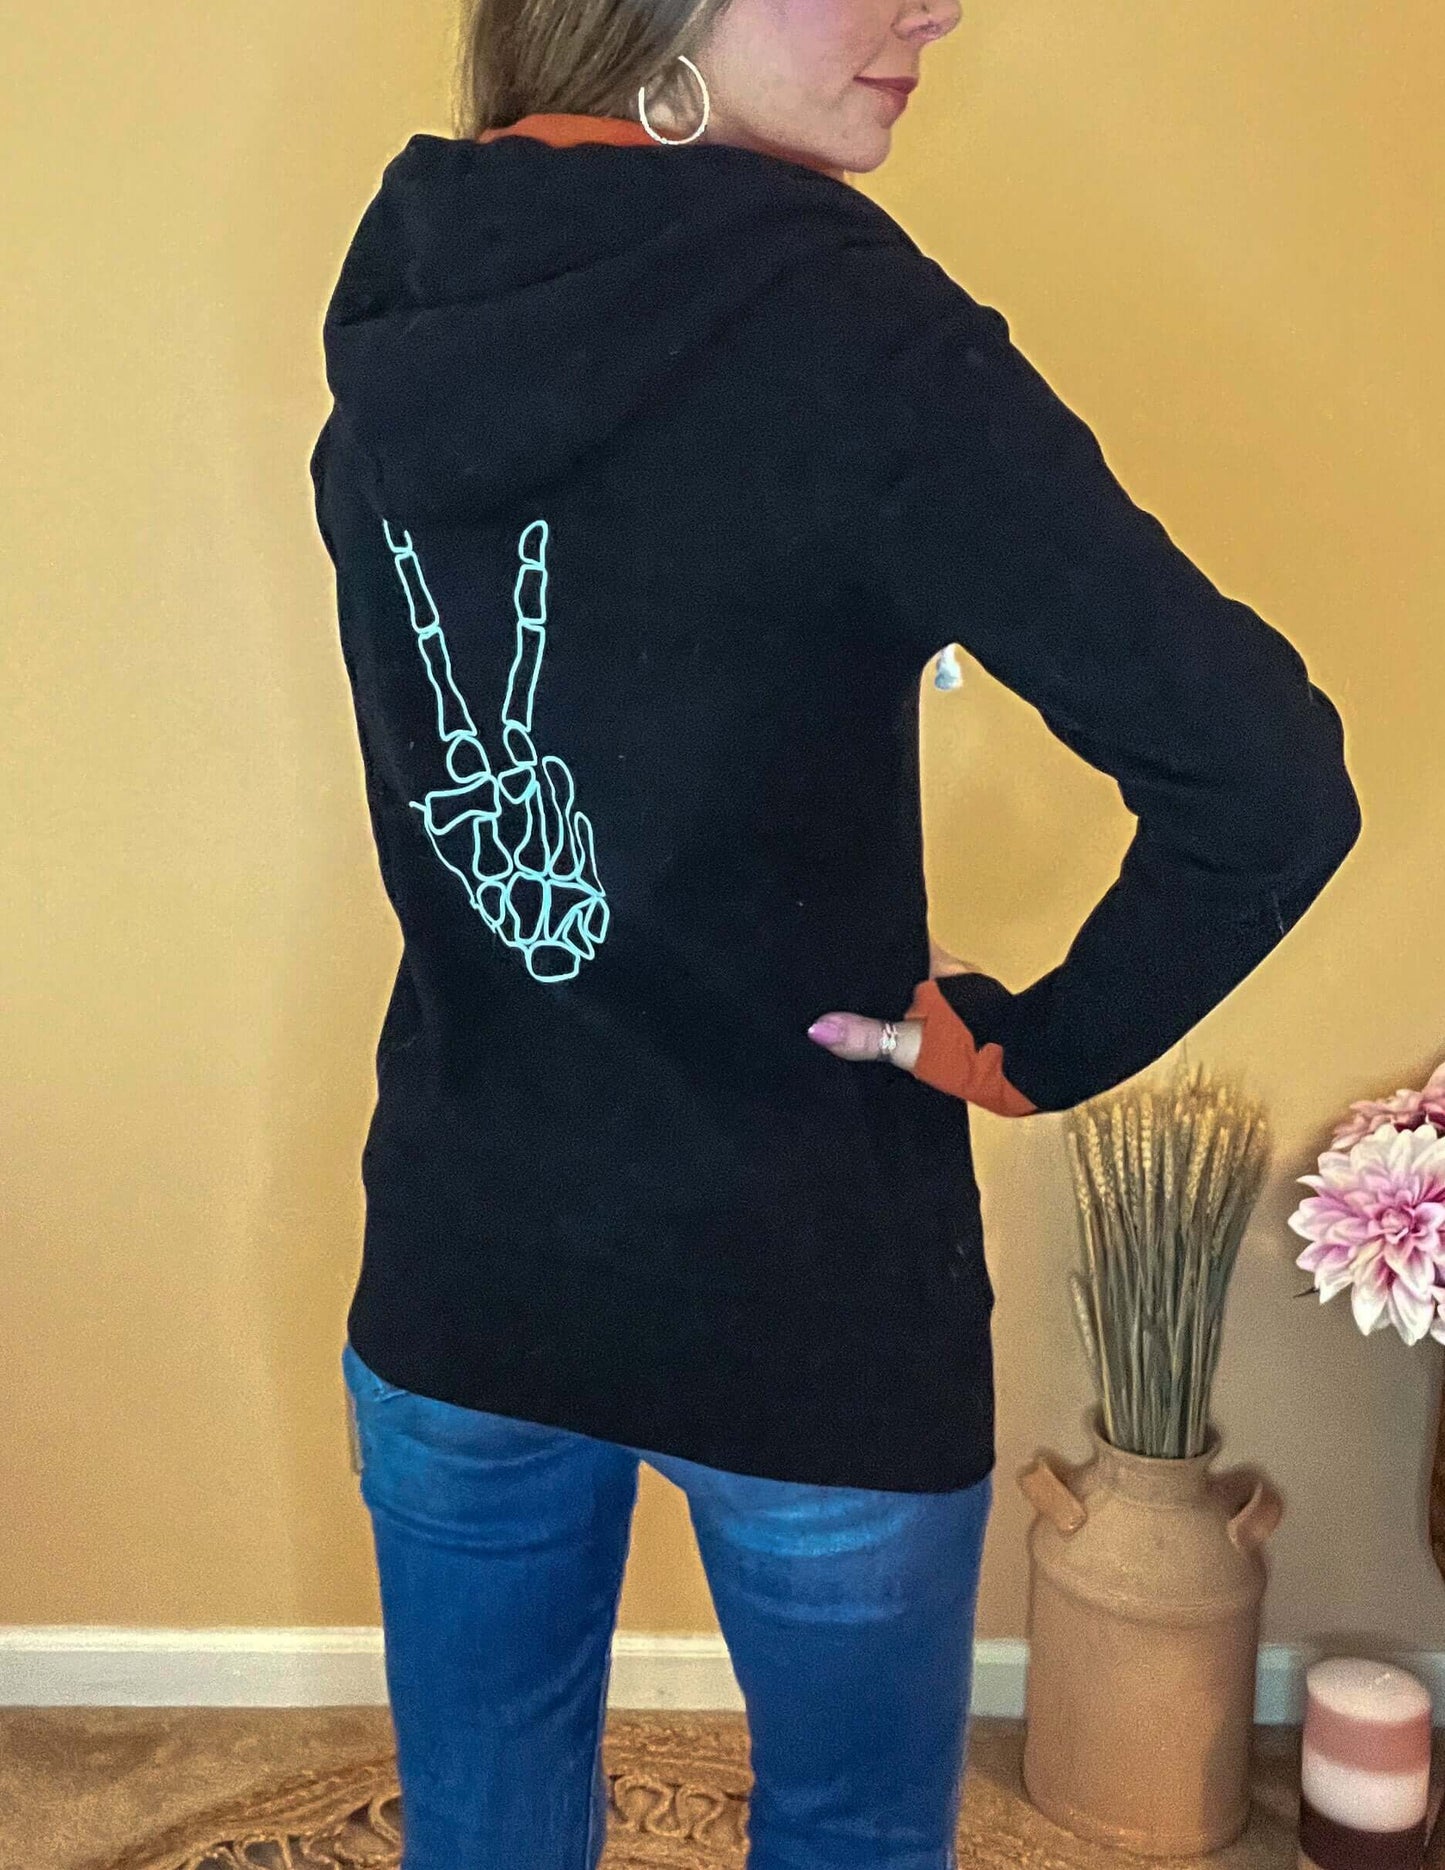 Shirts & Tops accent finger holes, Ampersand, ampersand ave full zip hoodie, Ampersand Avenue, ampersand avenue full zip hoodie, Ampersand Avenue Fullzip Sweatshirt, ampersand sweatshirts, clothing, halfzip, hoodie, R.I.P. Out, shirts & tops, skeleton des